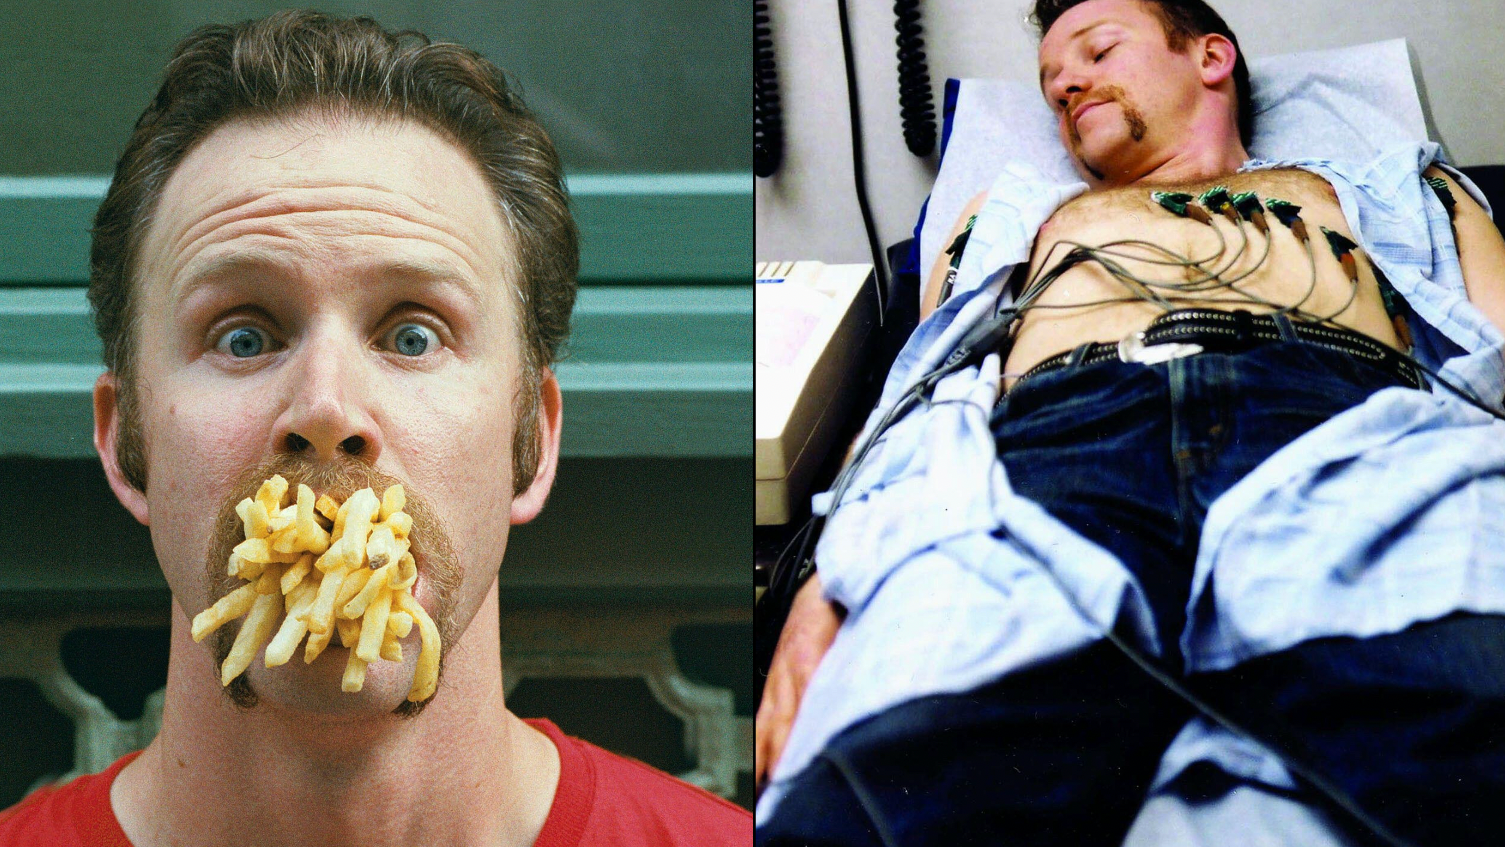 Morgan Spurlock launches chicken pop-up to debut 'Super Size Me 2